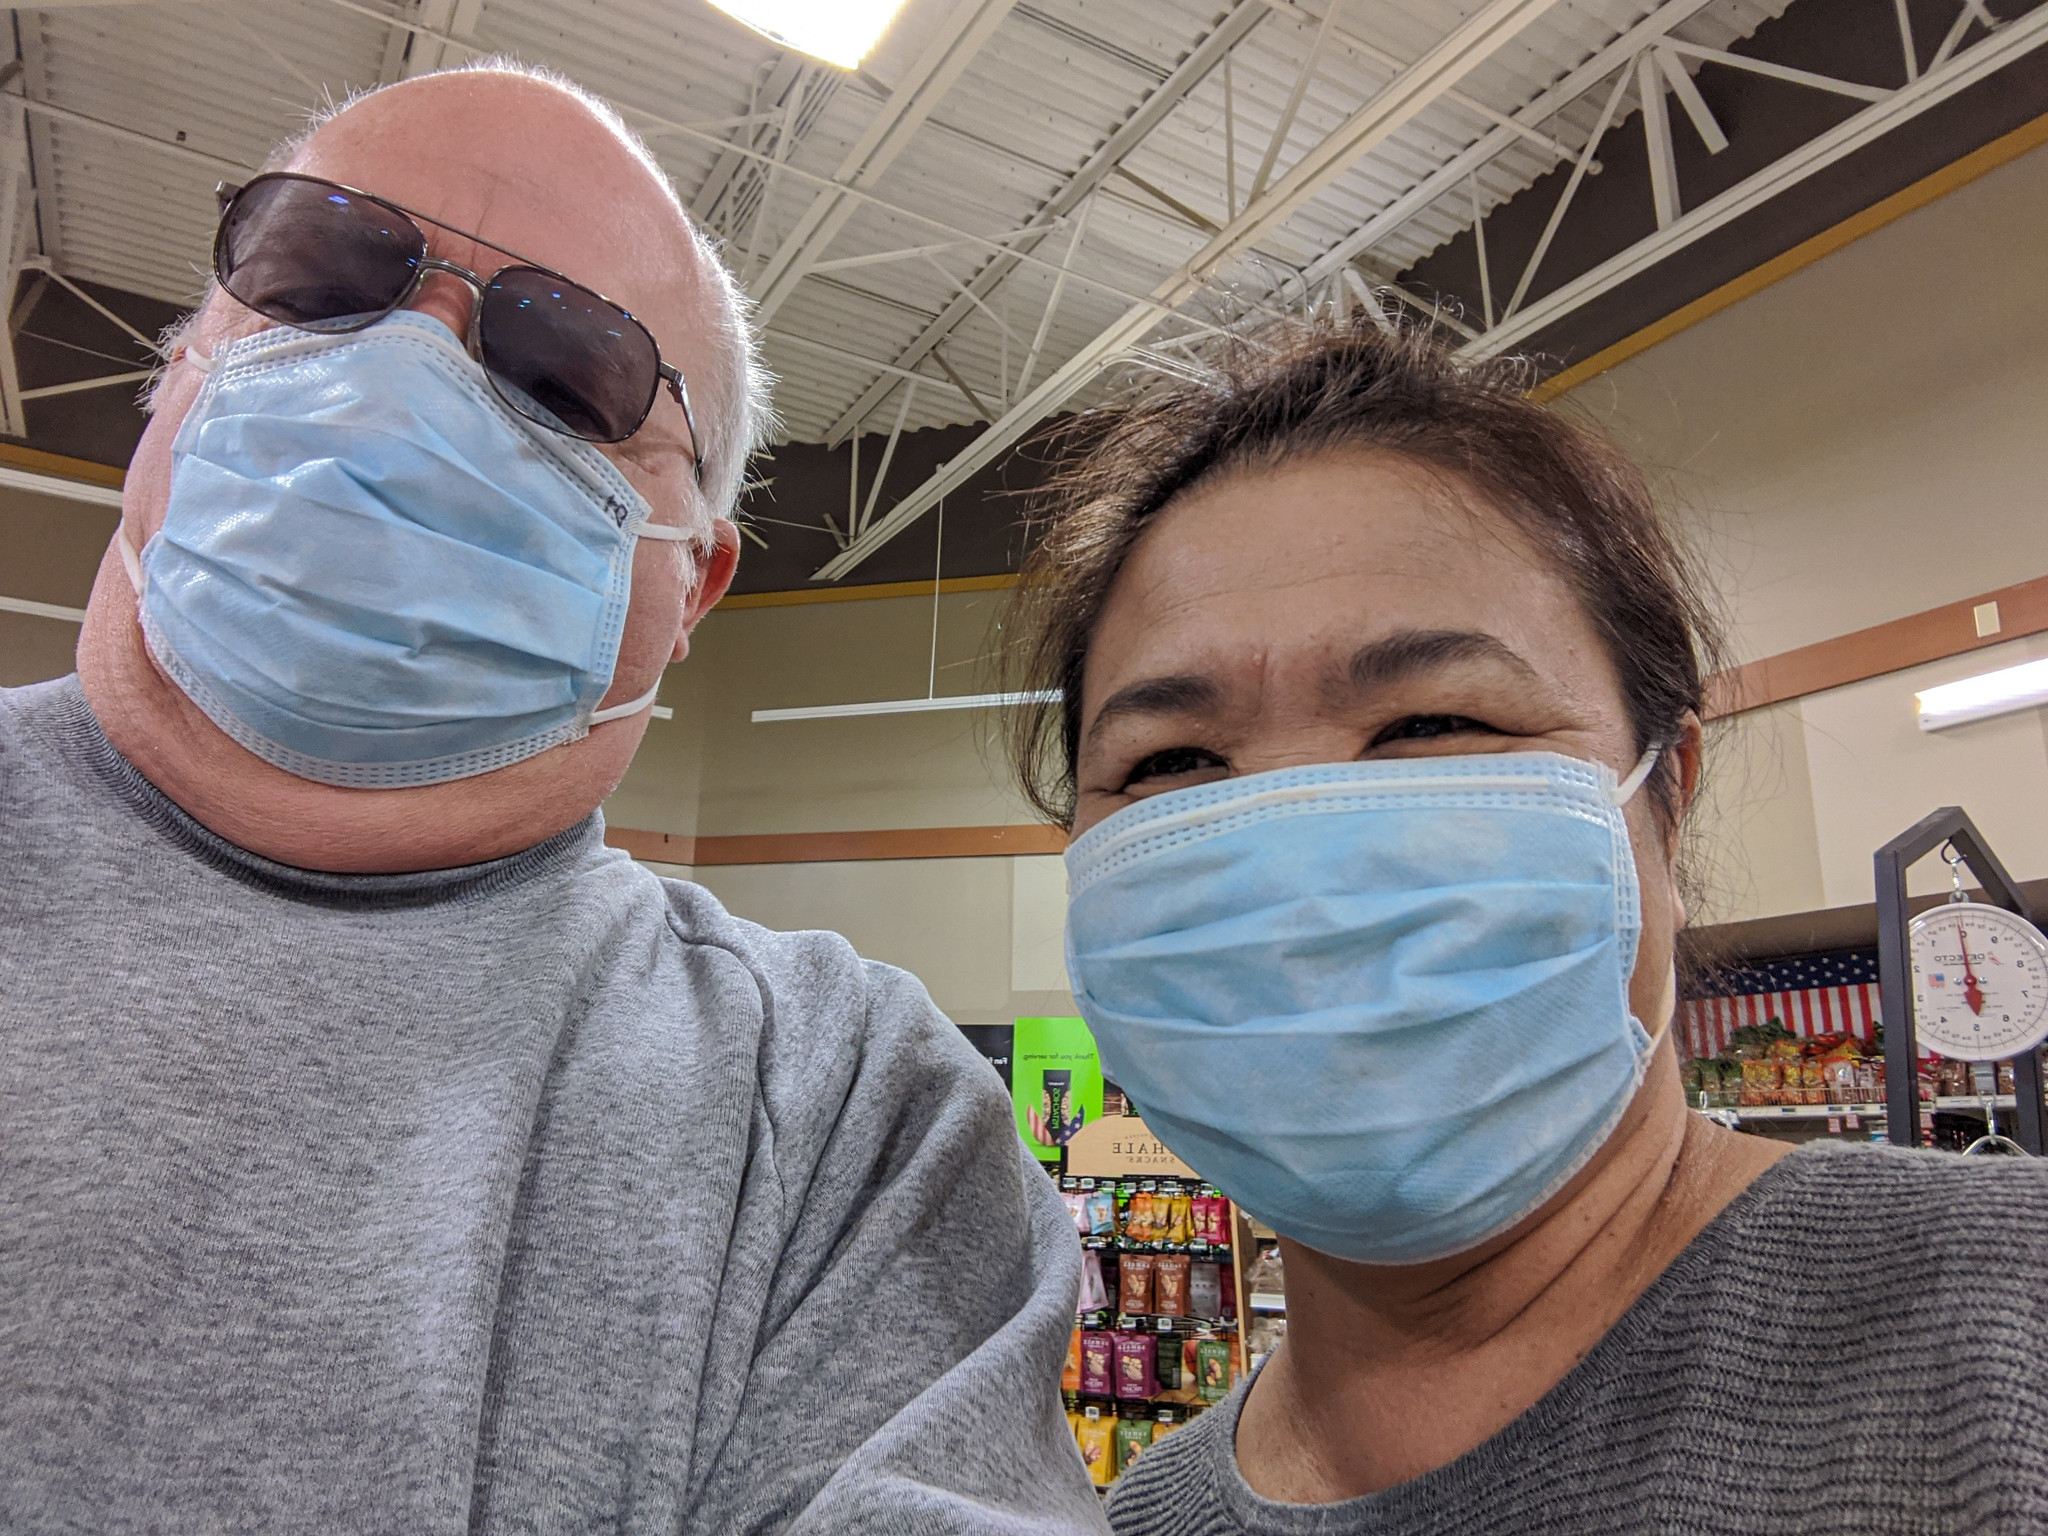 Two people shopping with masks on.